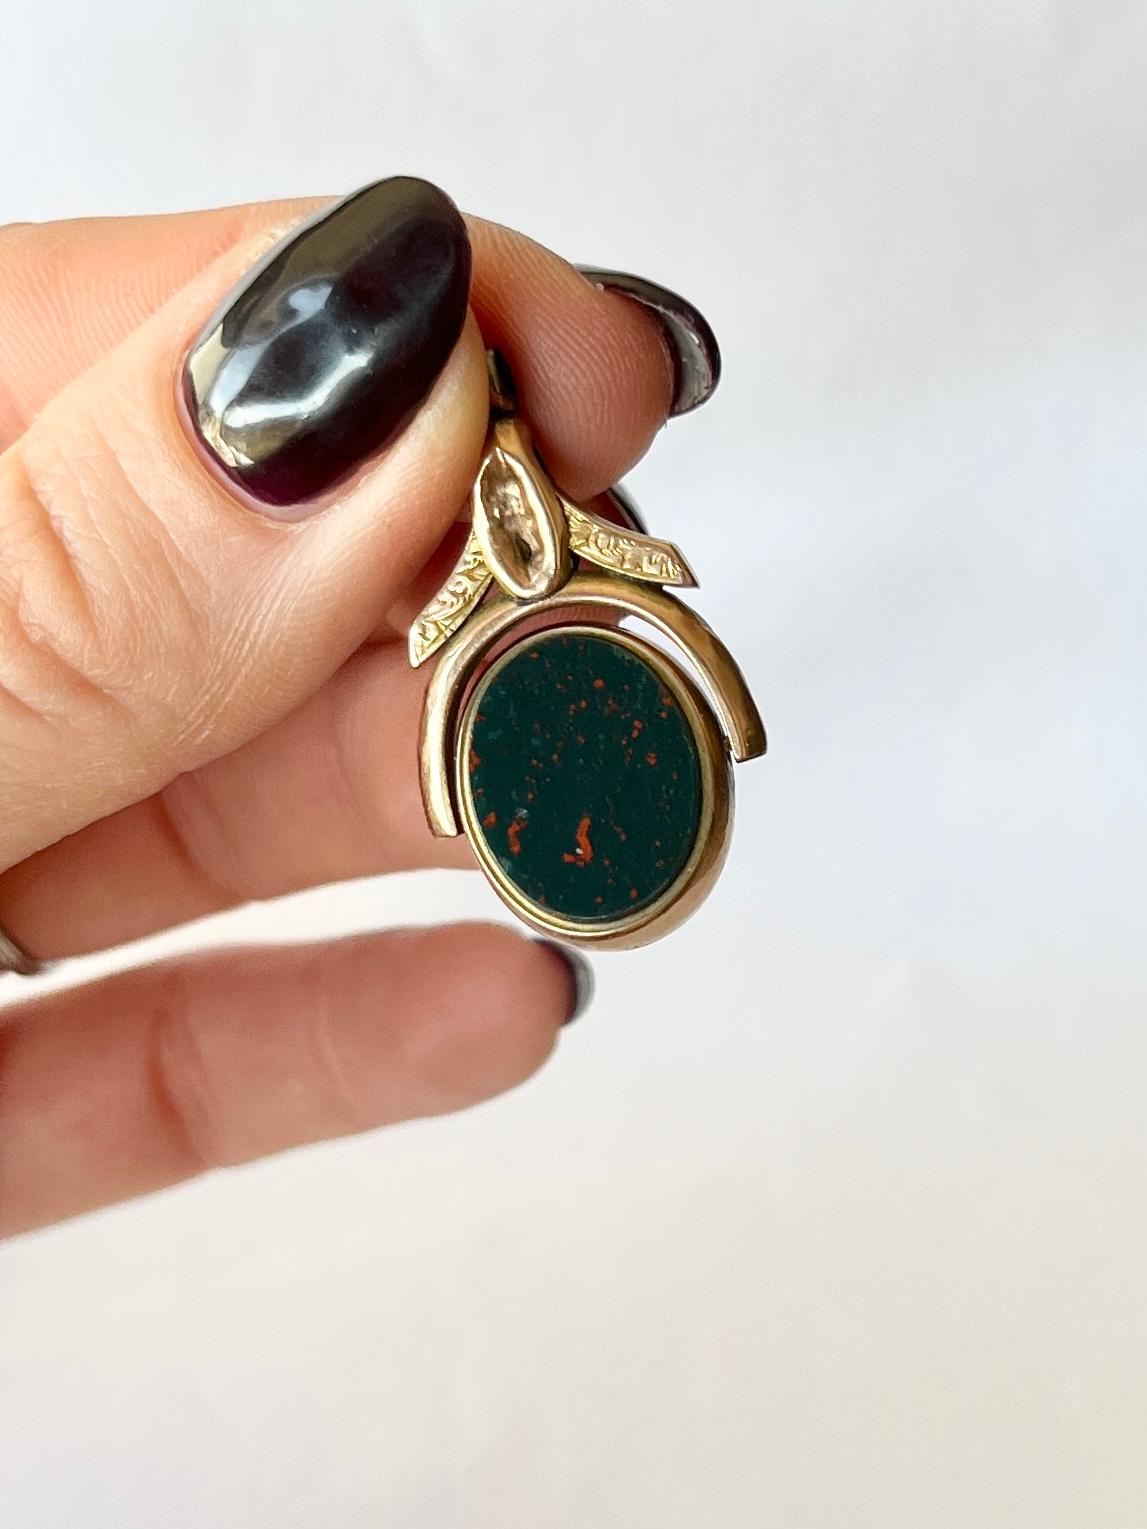 This swivel fob holds a gorgeous sardonyx and bloodstone set into it. 

Fob Face Dimensions: 15x12mm

Weight: 4.9g